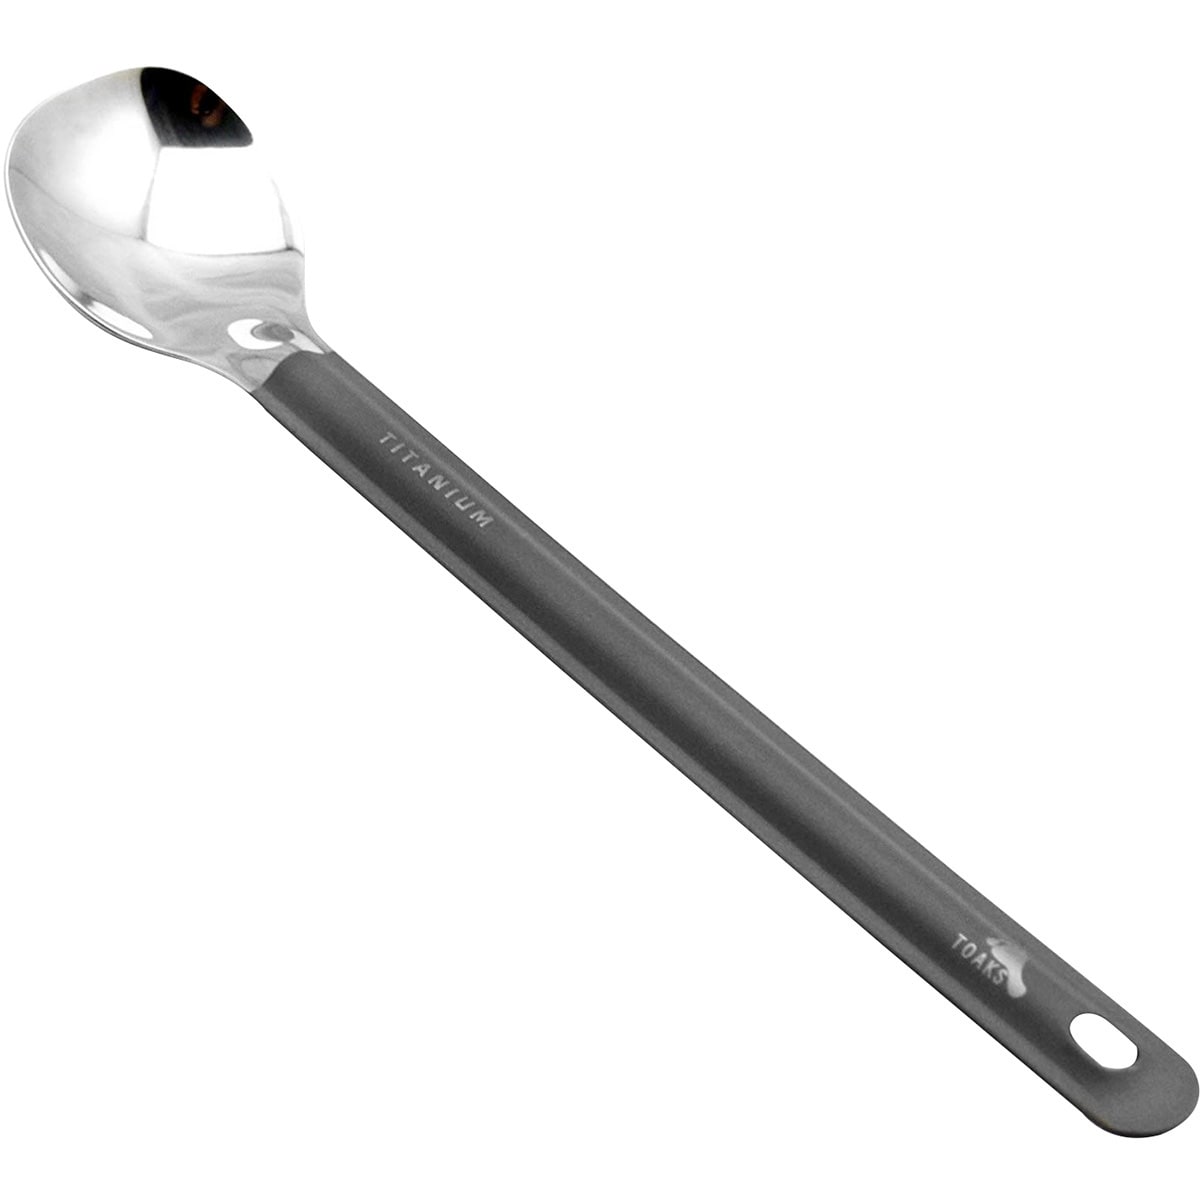 TOAKS Titanium Long Handled Spoon with Polished Bowl SLV-11 Outdoor Camping